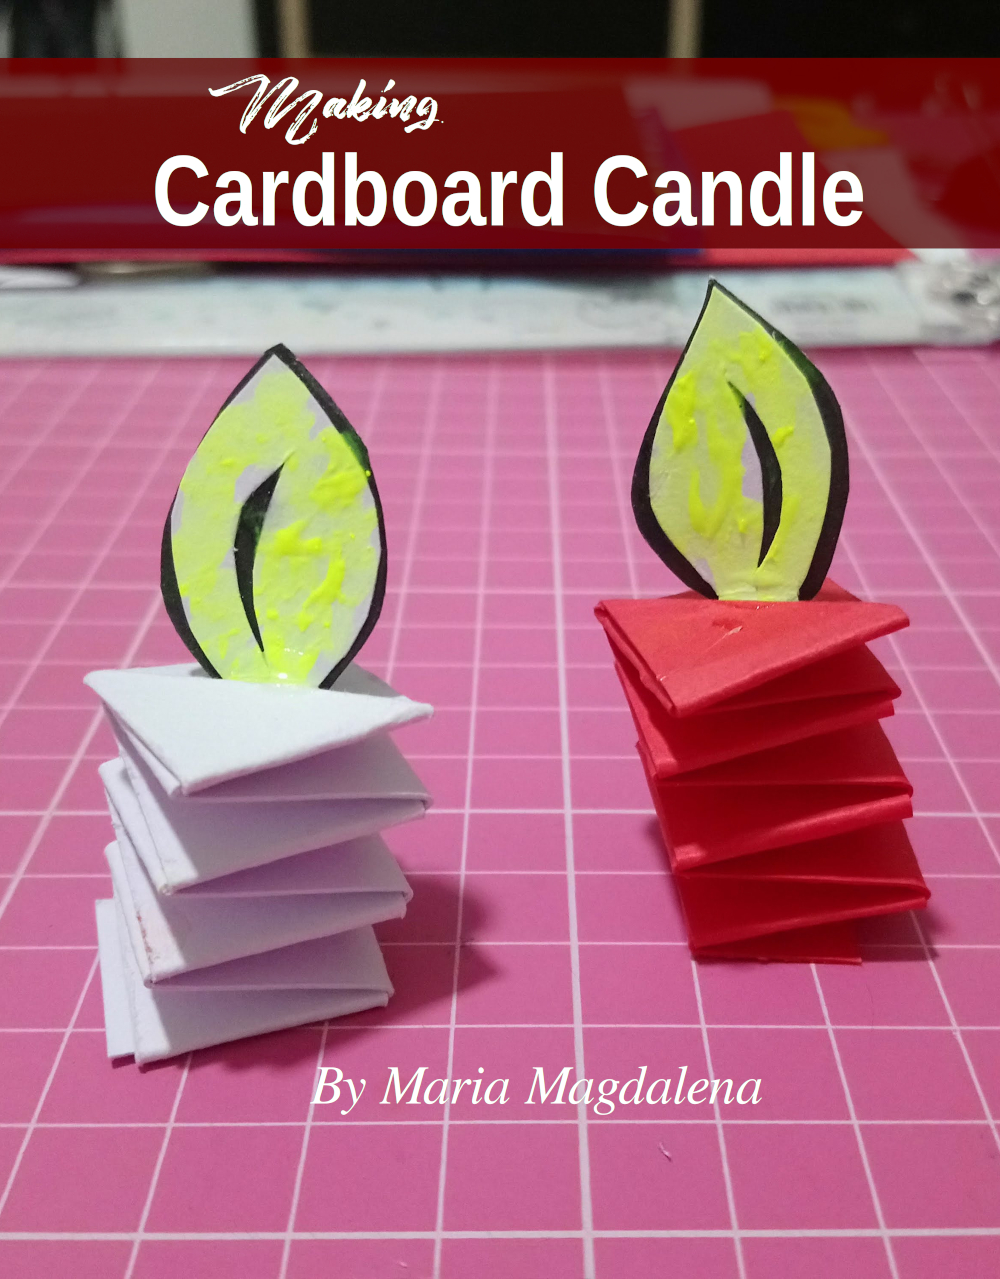 How to make cardboard candle for Christmas decoration